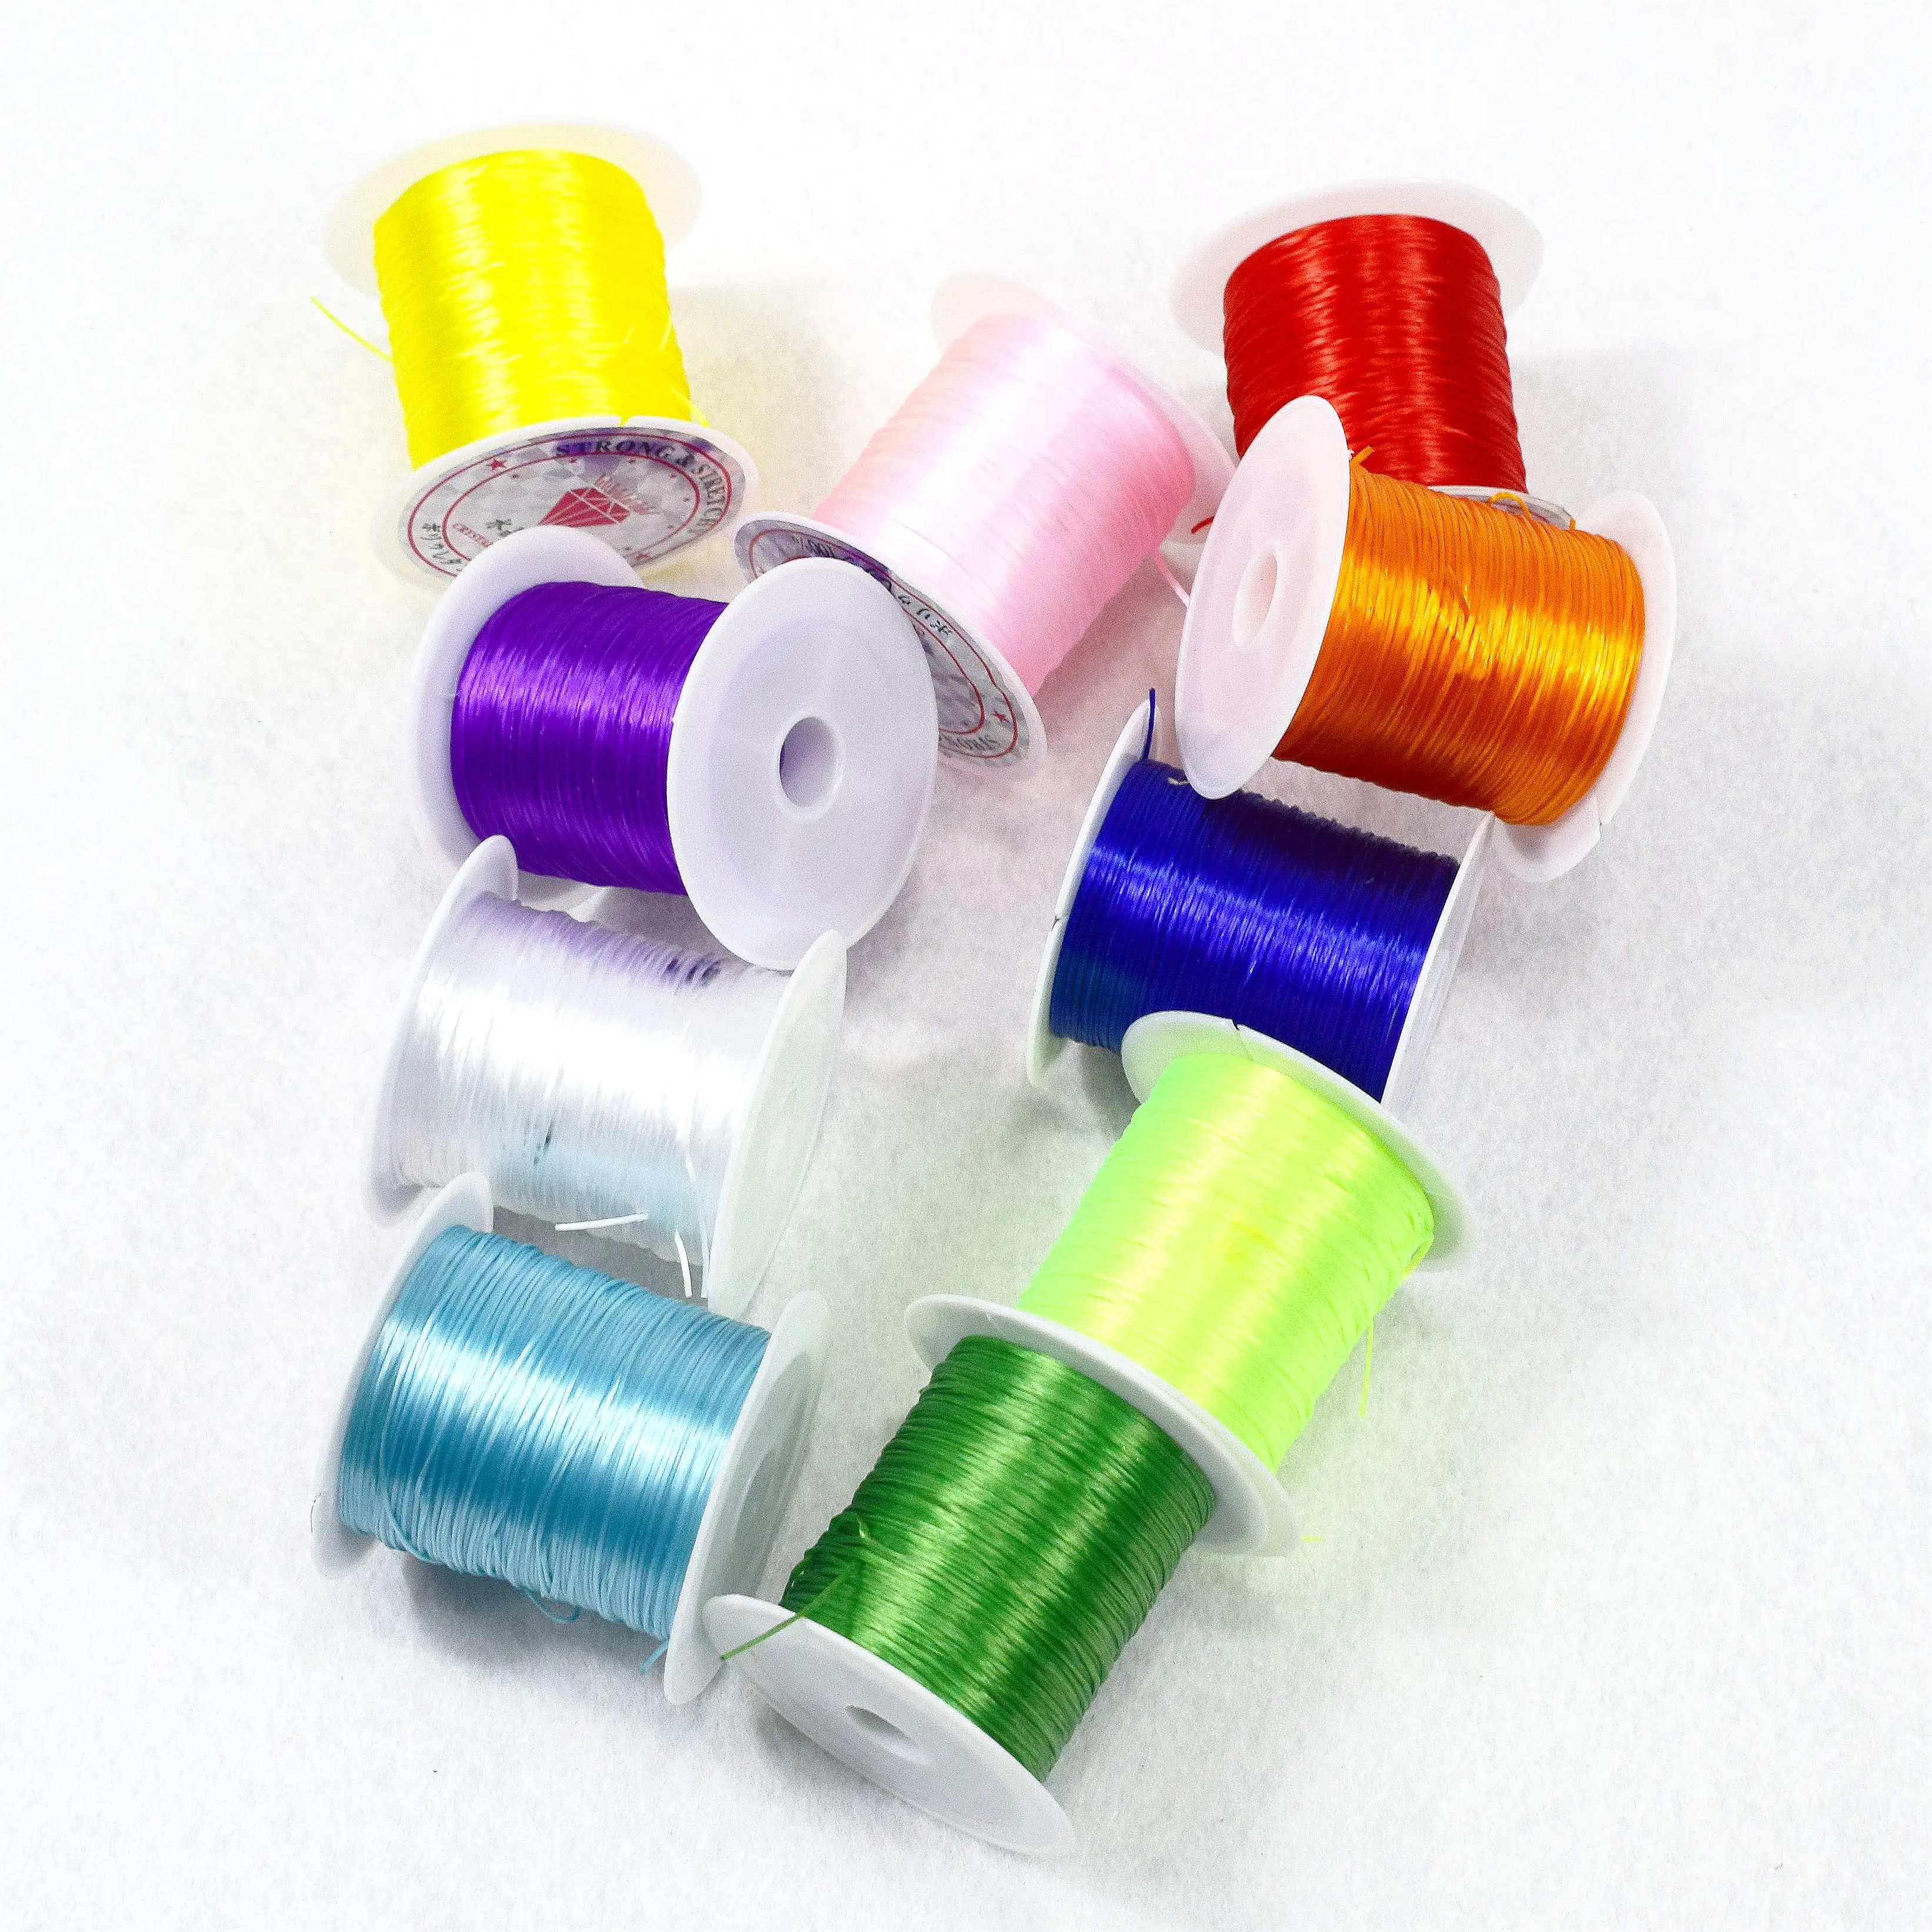 0.8mm Elastic String Stretchy Bracelet String Crystal String Bead Cord for Jewelry Making